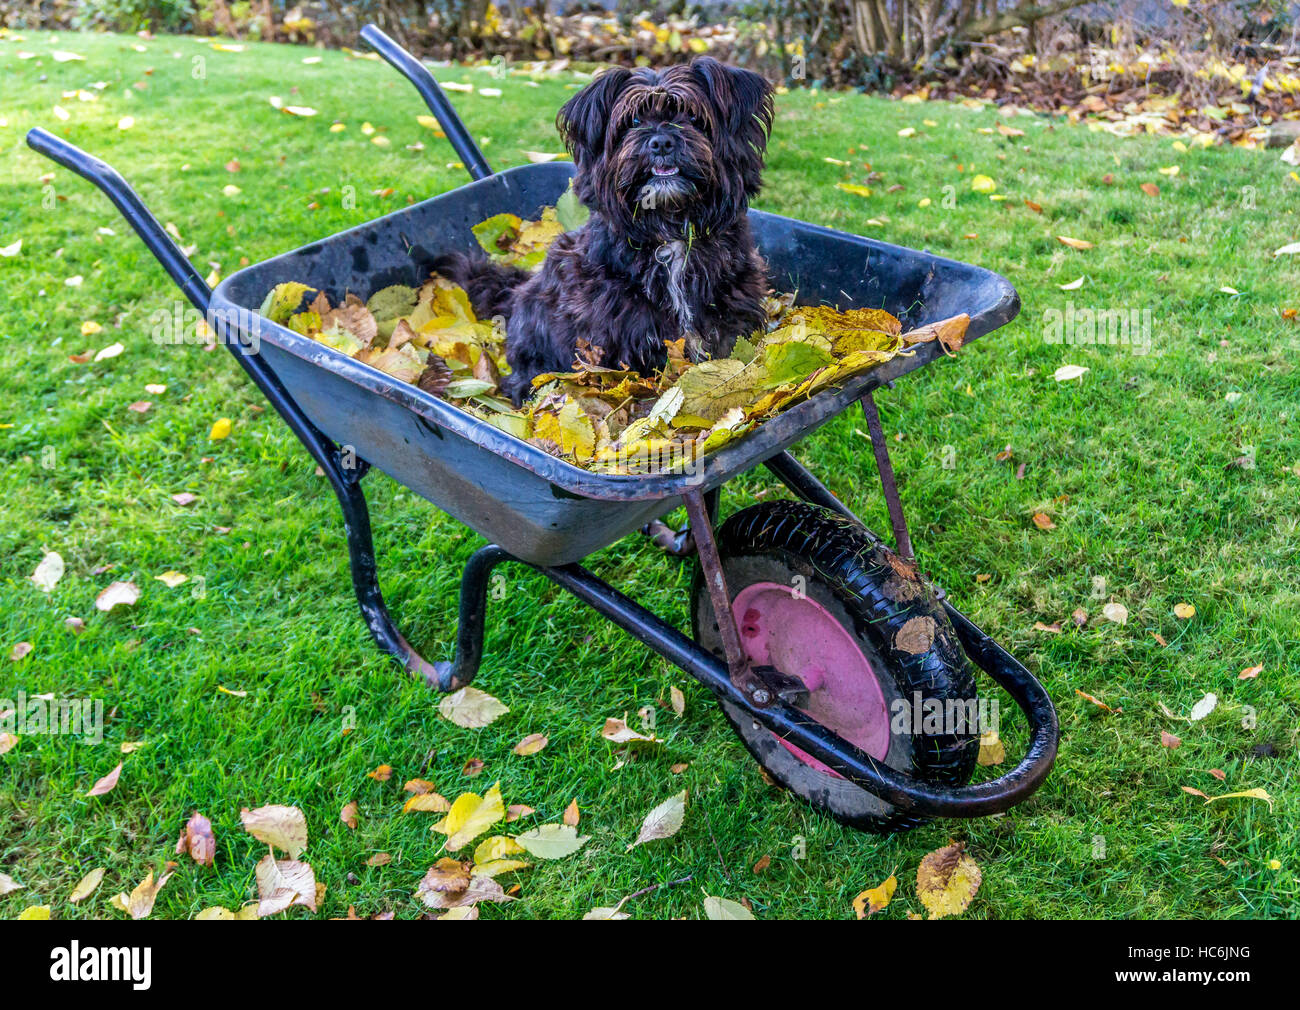 Weshie dog in a wheelbarrow of Autumn Leaves in the garden Stock Photo